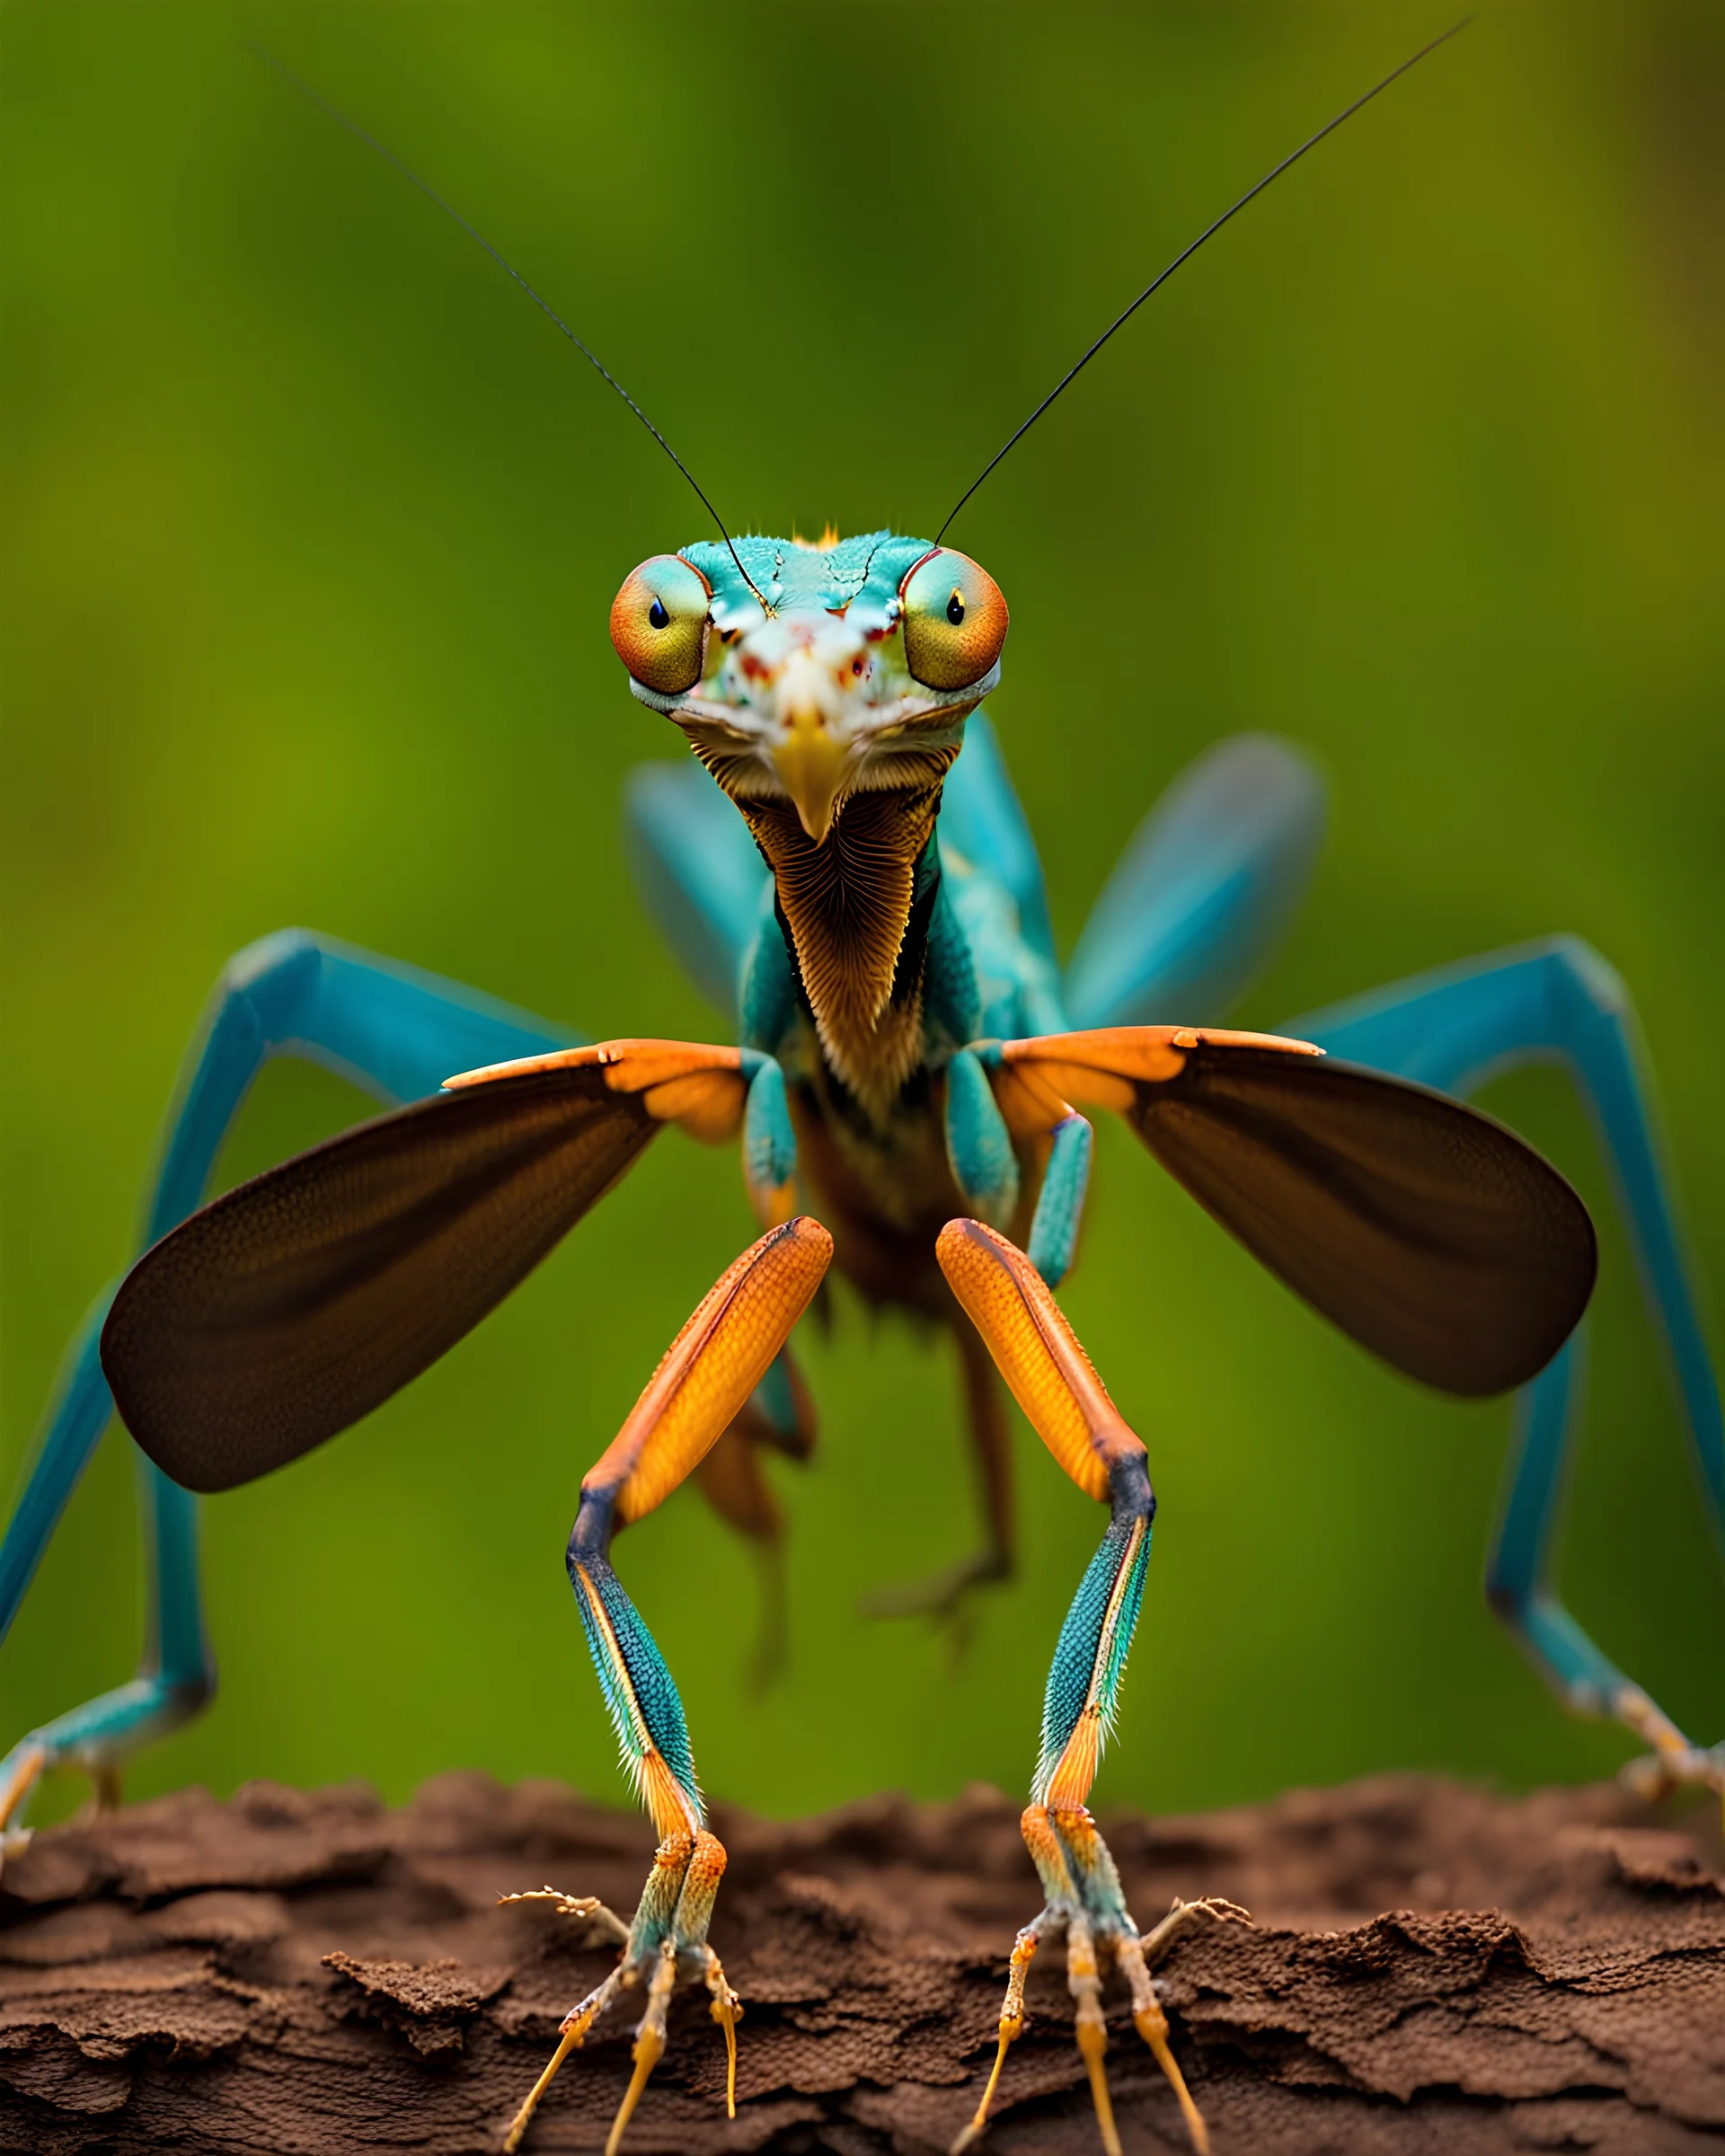 a national geographic style photograph of a eagle mantis lizard hybrid, in frame, large wings